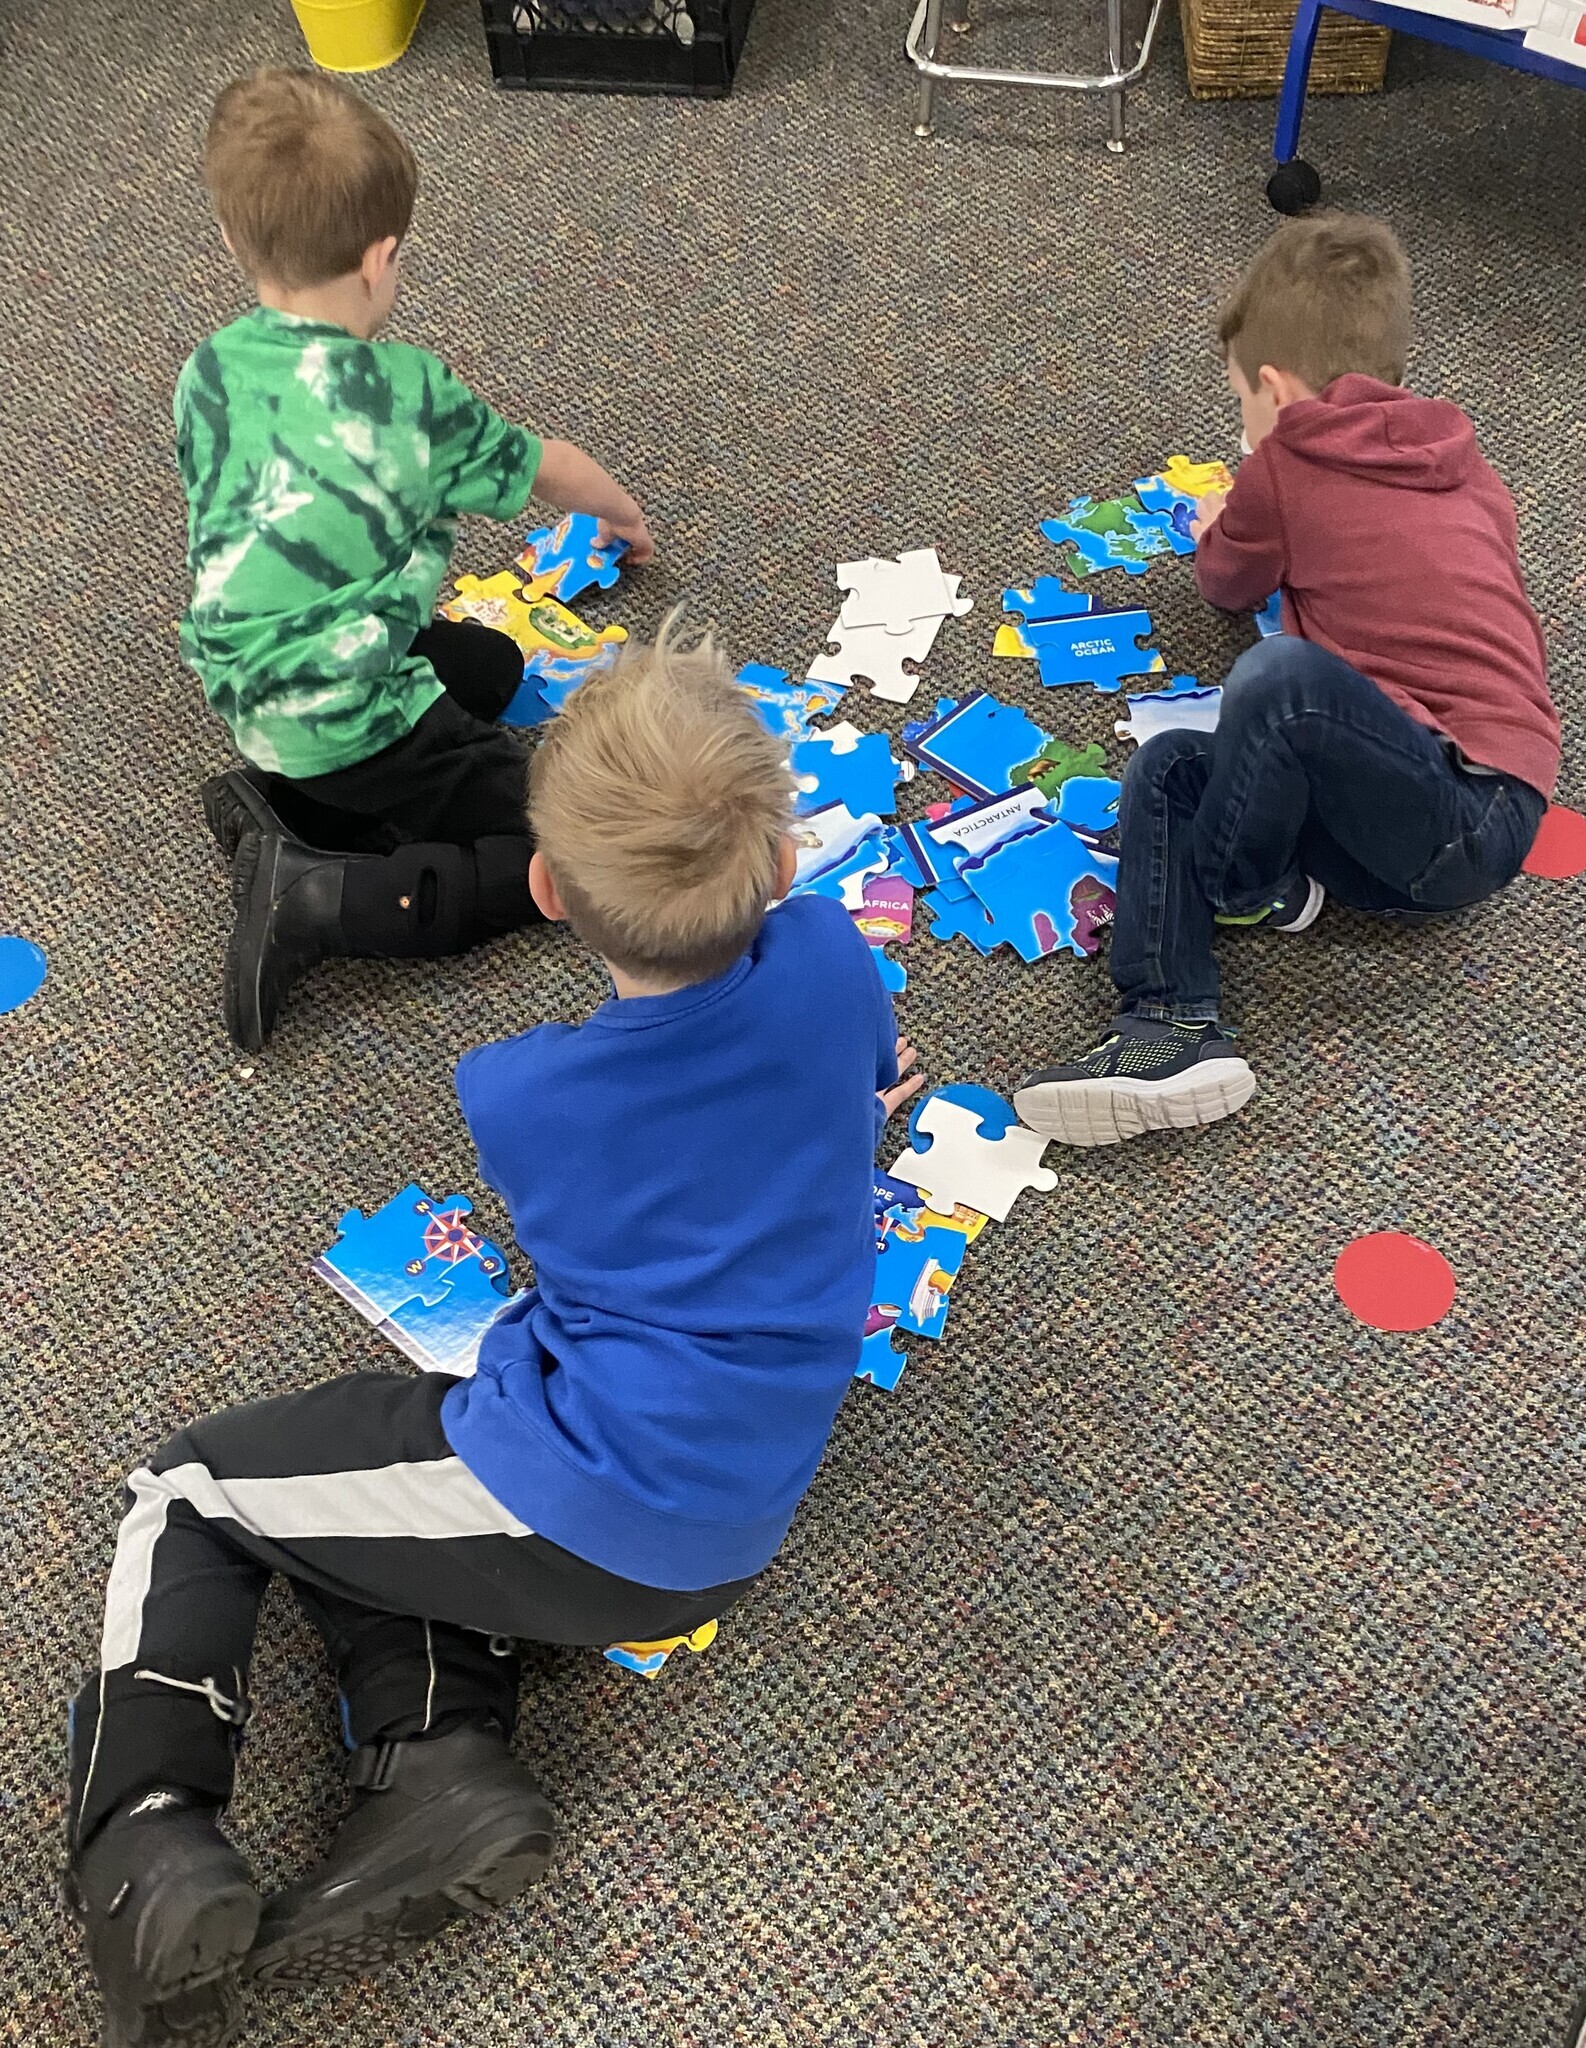 Puzzles develop memory skills, as well as an ability to plan, test ideas and solve problems. While completing a puzzle, children need to remember shapes, colors, positions and strategies to complete them. These skills are important foundational skills for all future learning.